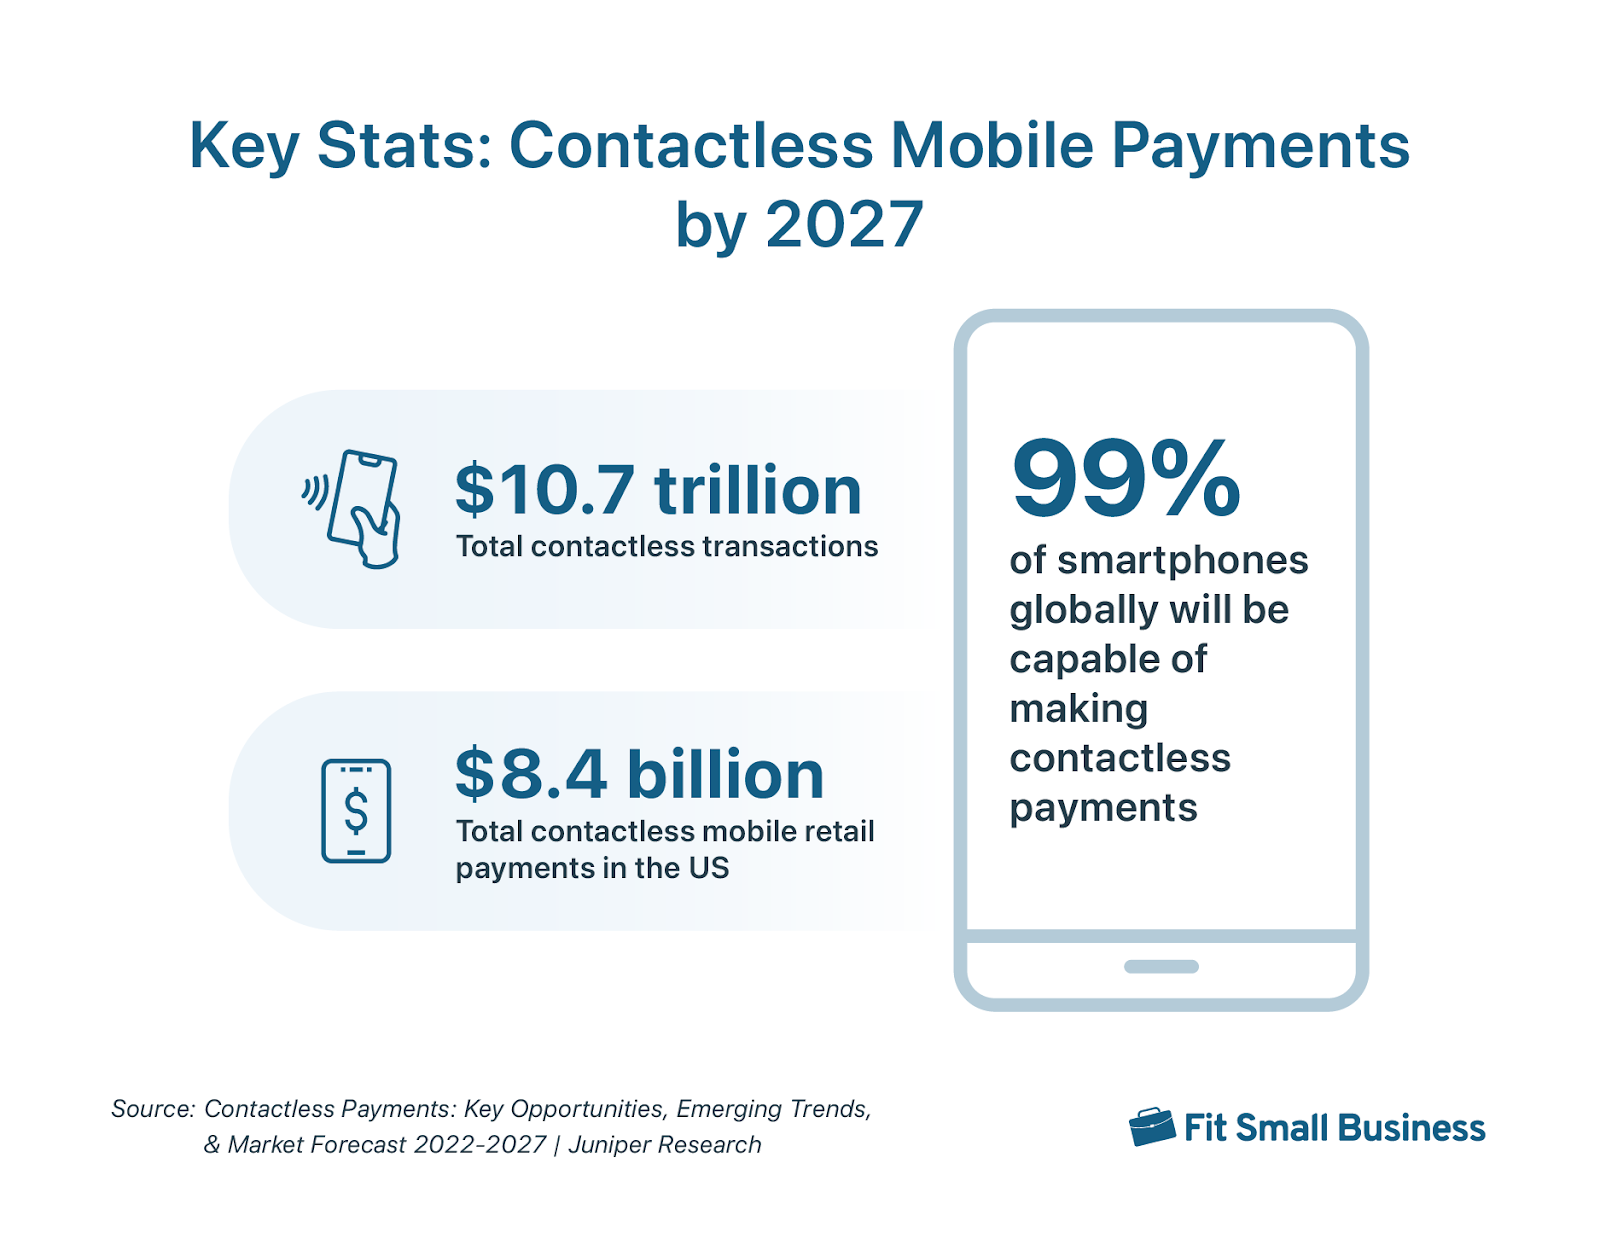 Infographic with key statistics about contactless payments by 2027.